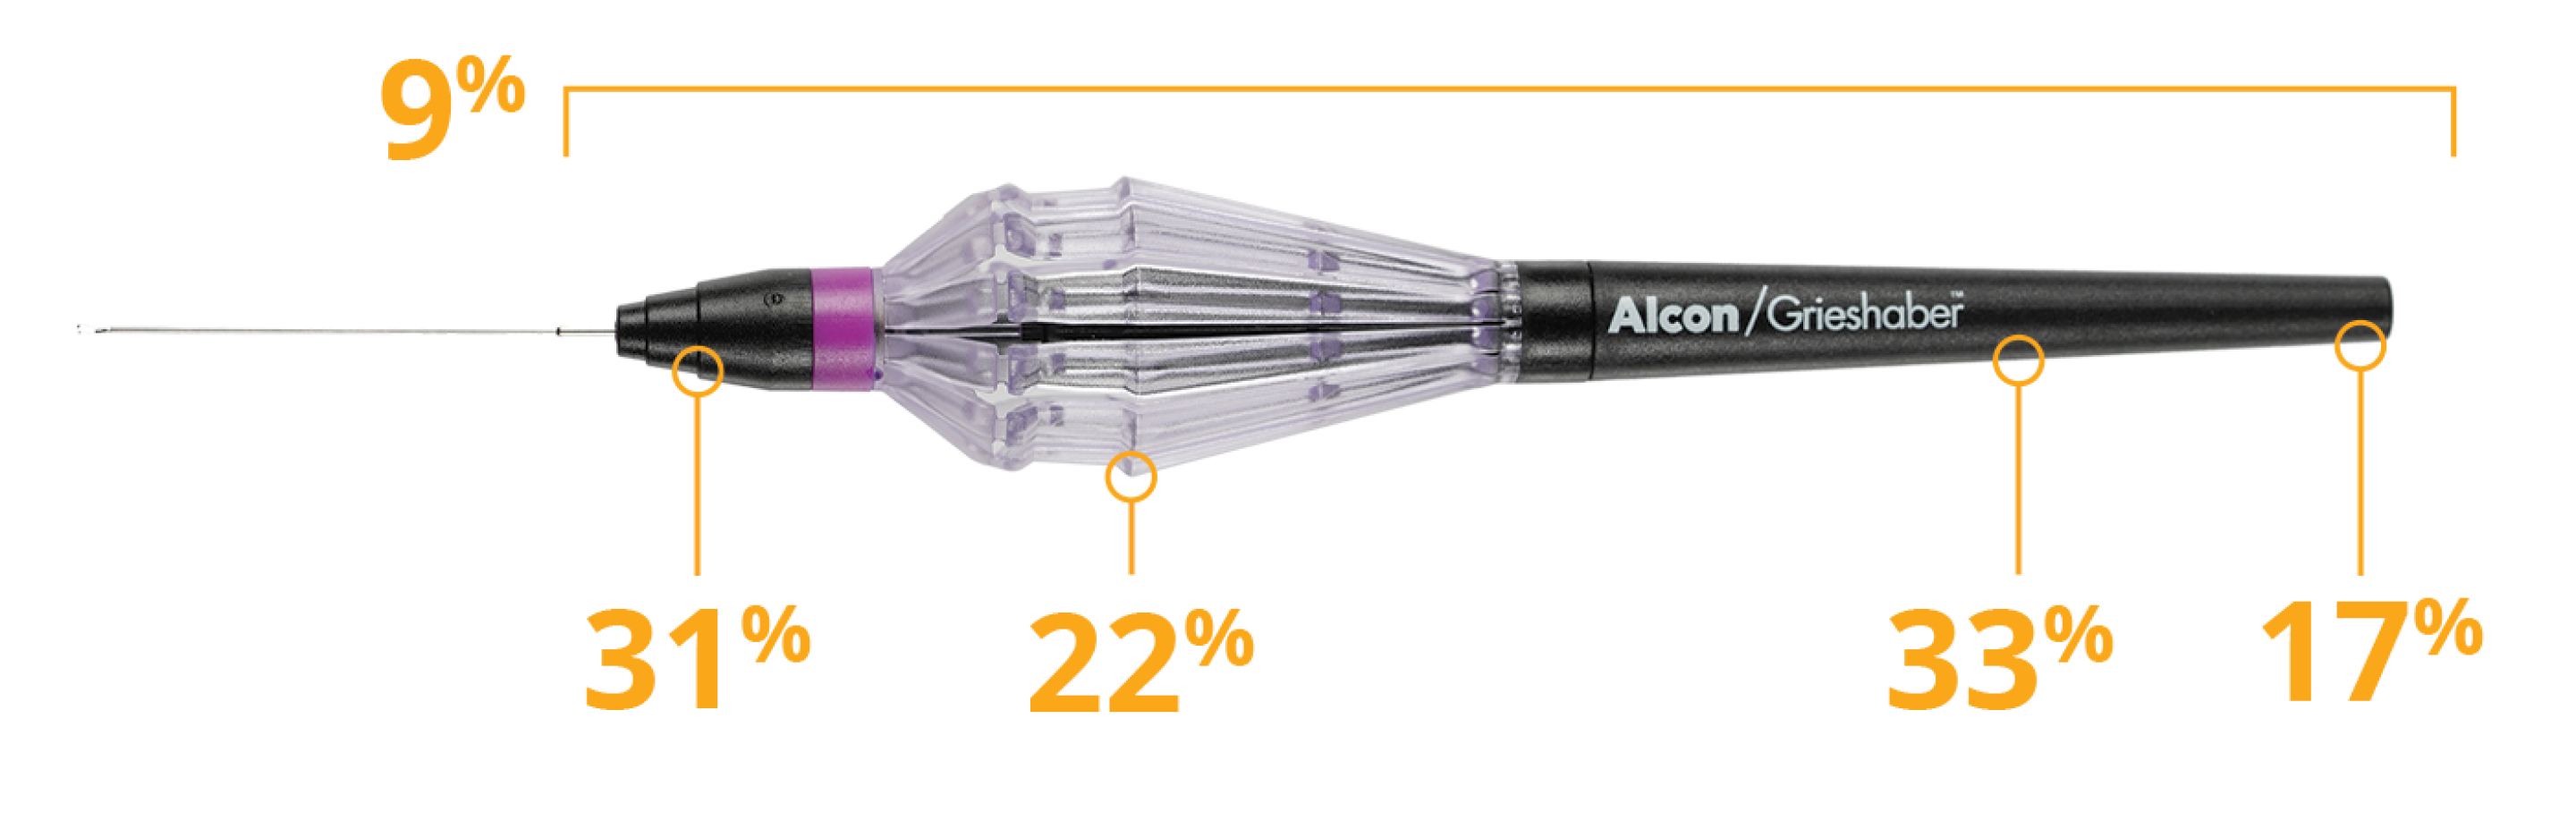 FINESSE REFLEX placed horizontally on a purple background. Various statistical facts are placed around the image of the FINESSE REFLEX such as: the handle is 9% shorter length overall, has a 31% thinner nose cone, 22% smaller basket diameter, 33% smaller tail diameter and 17% shorter tail length.